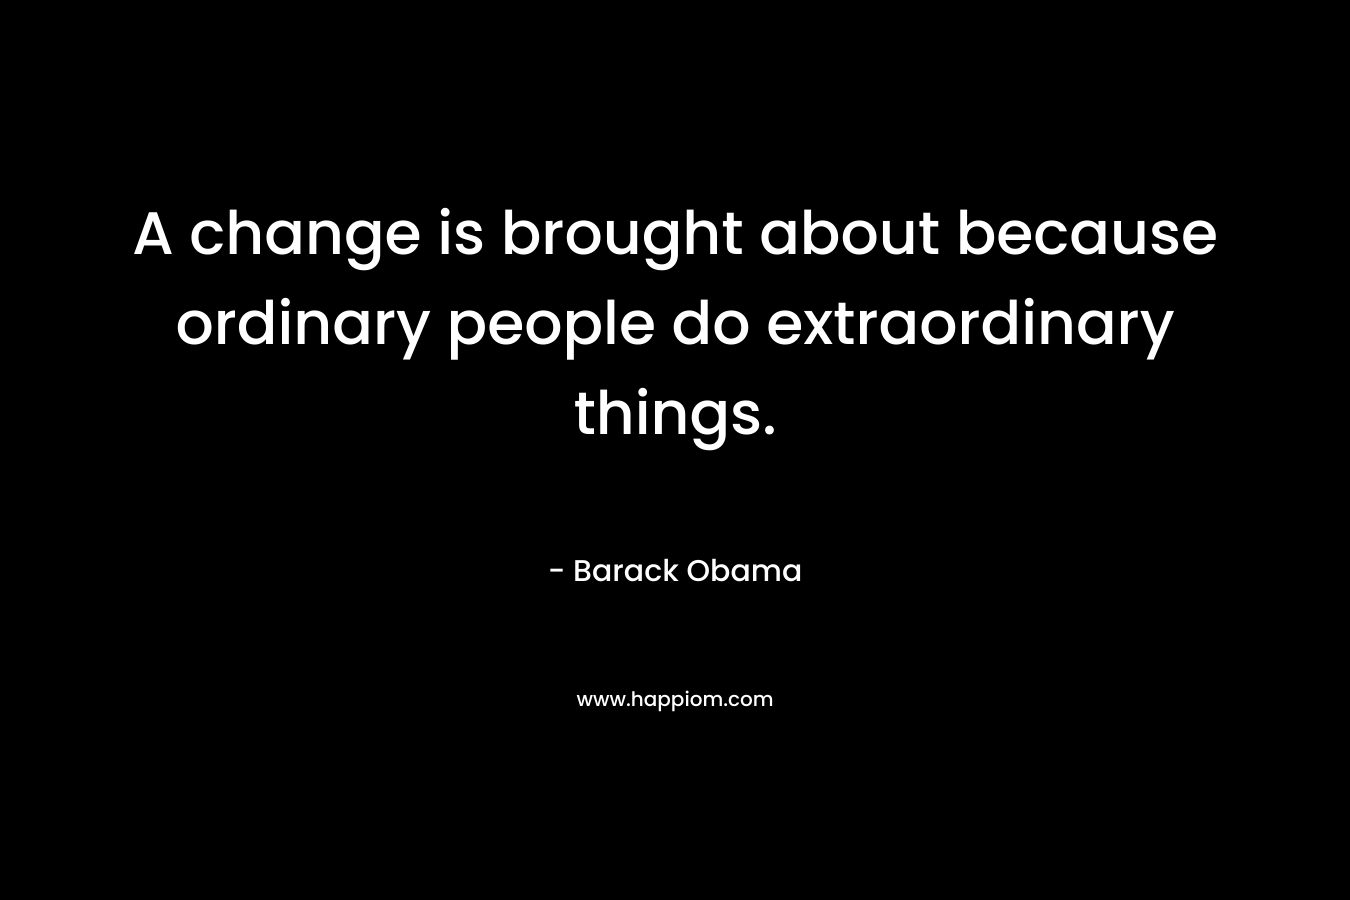 A change is brought about because ordinary people do extraordinary things.